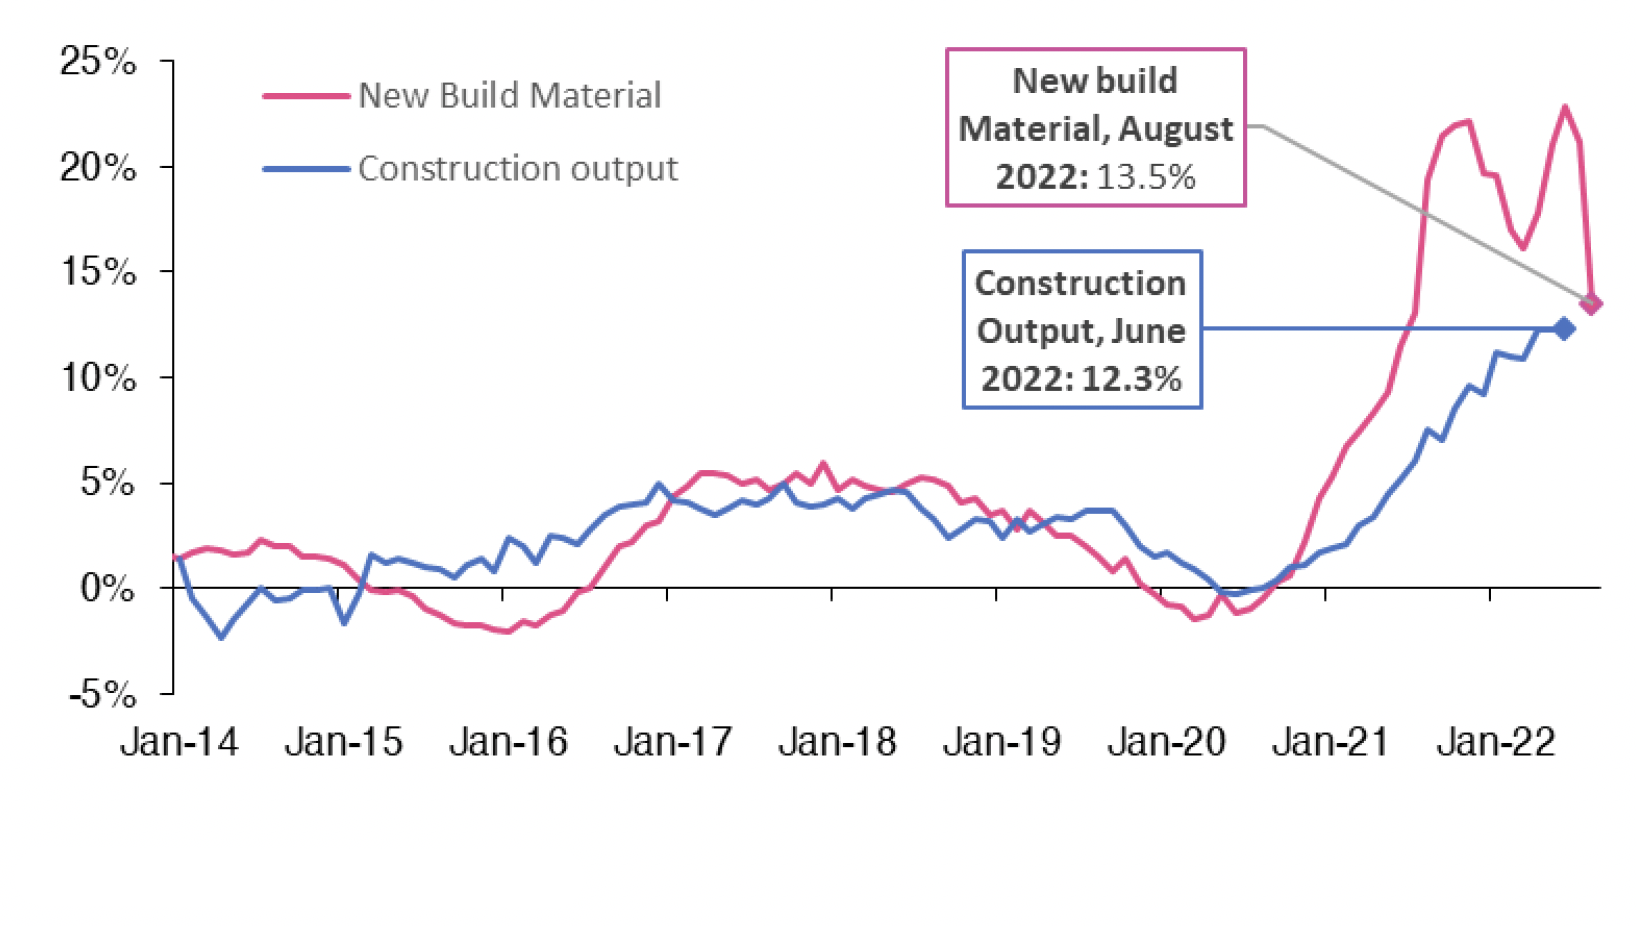 Chart 10.3 provides information on how the annual change in the output index of new build housing (public and private) and the price of construction materials for new build housing in the UK has changed on a monthly basis. The data for the output index of new build housing covers the period from January 2014 to June 2022, whilst the price of construction materials for new build housing covers the period from January 2014 to August 2022. 